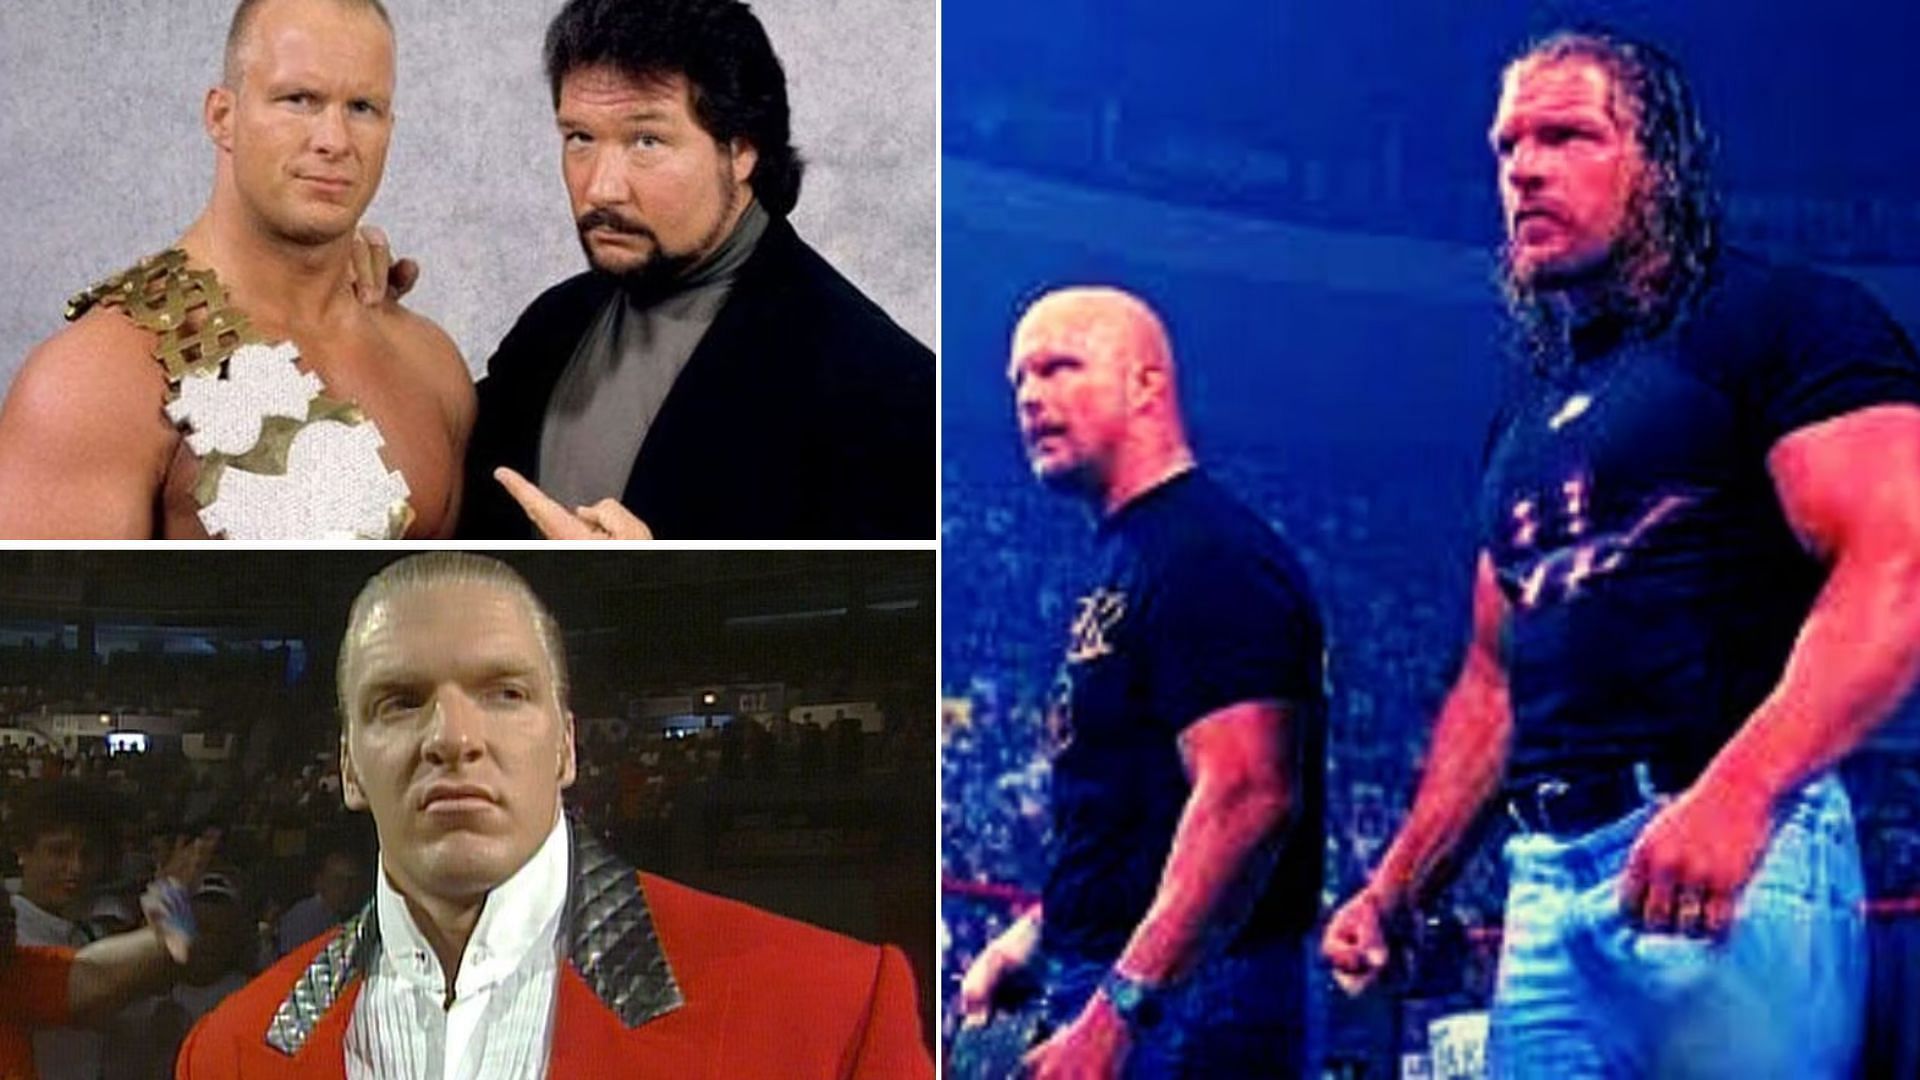 Both Triple H and Steve Austin's career draws parallels